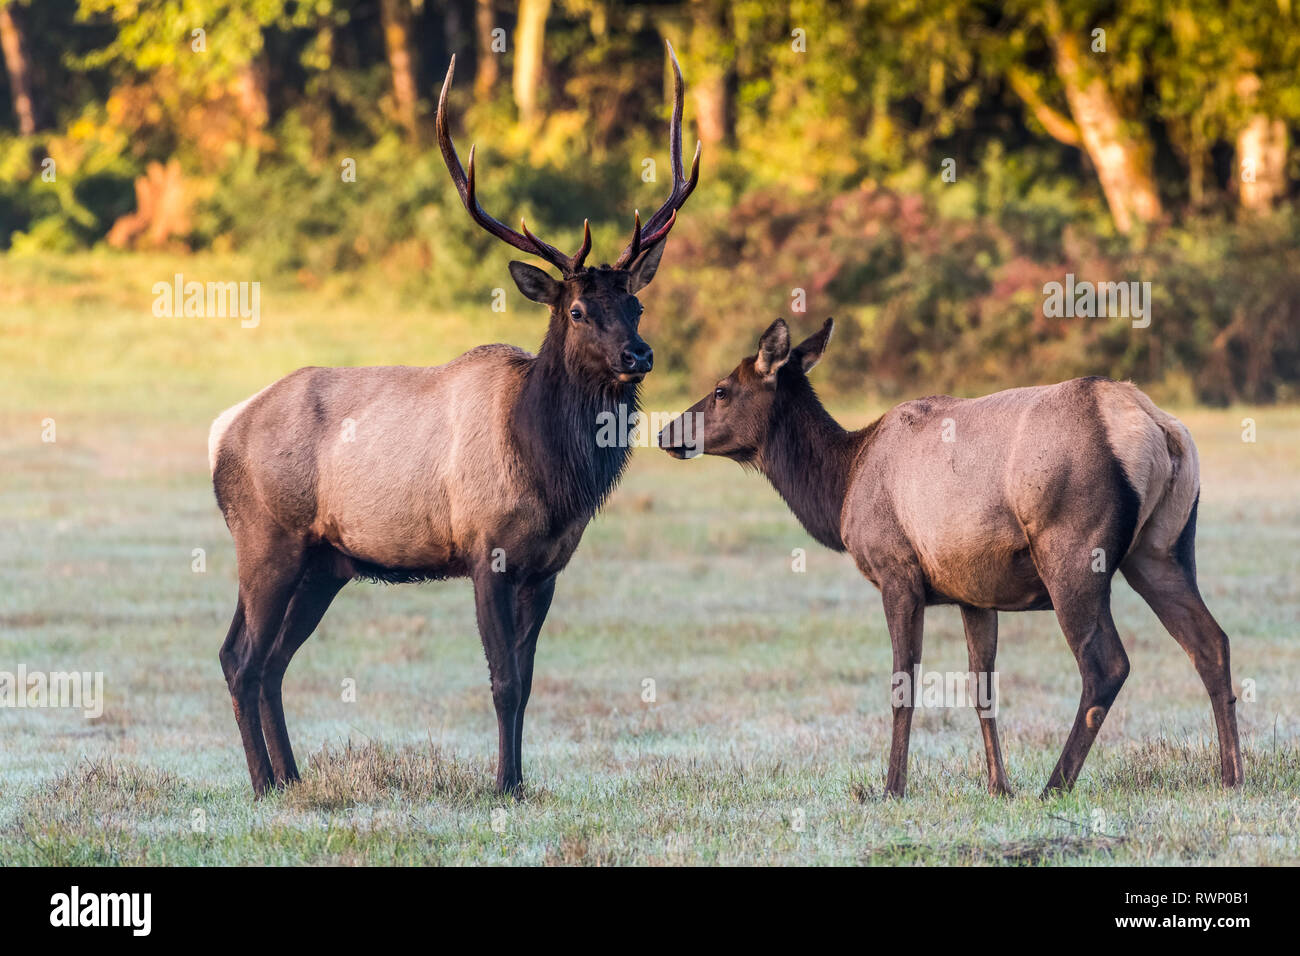 A pair of Roosevelt Elk (Cervus canadensis roosevelti) share the frame at Jewell Meadows Wildlife Area; Jewell, Oregon, United States of America Stock Photo